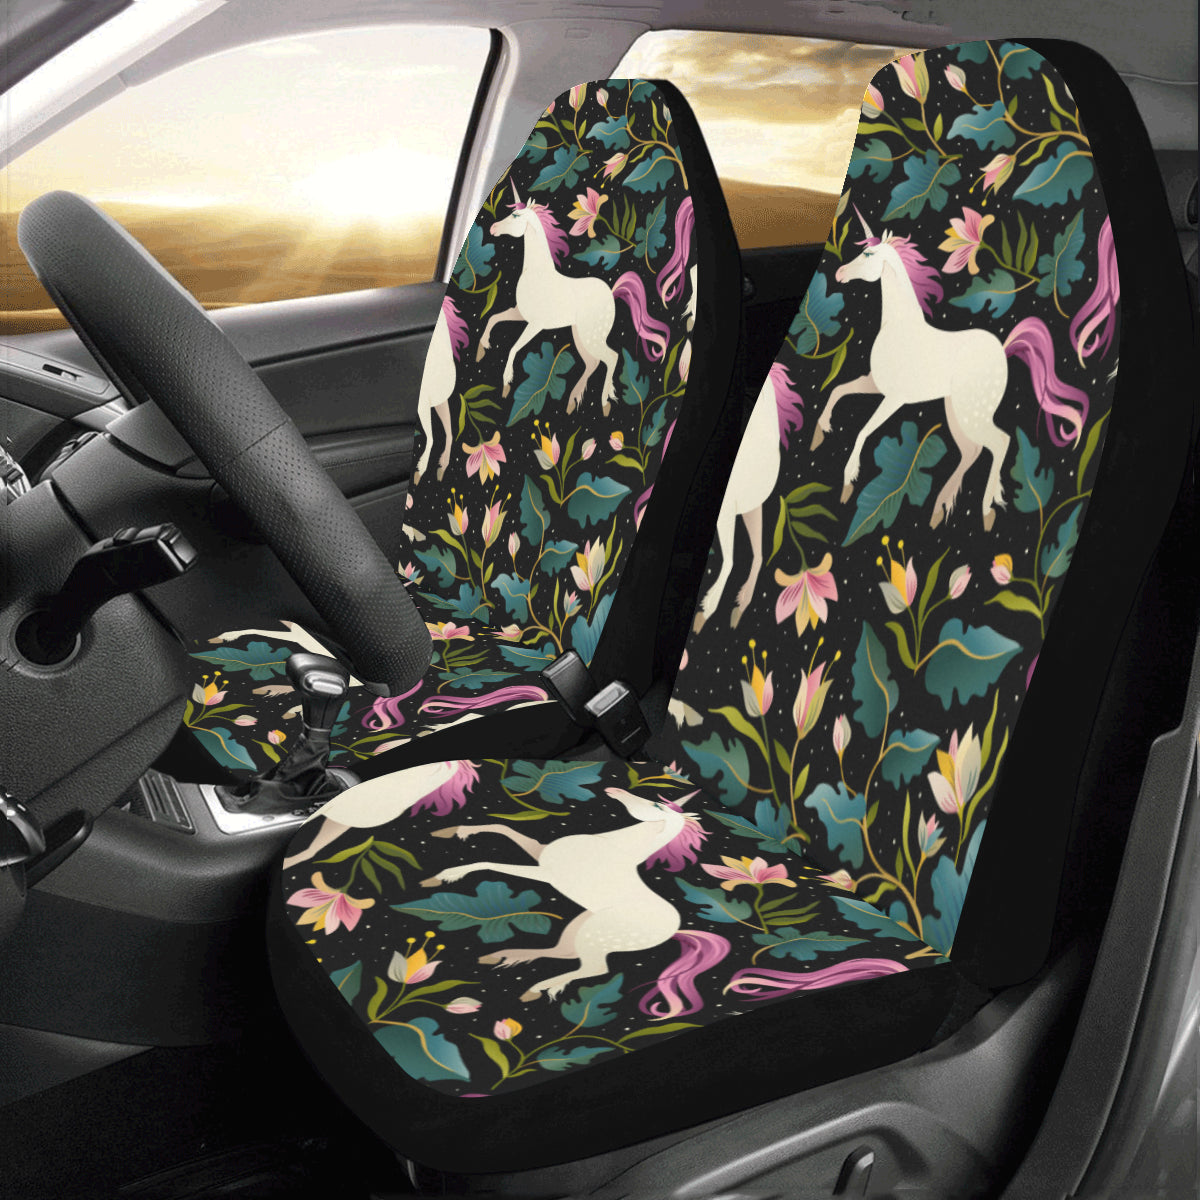 Car Seat covers for Women, Unicorn Purple Seat Cover 2 pc, Cute Horse Flowers Front Seat Covers, Car SUV Vans Seat Protector Accessory Starcove Fashion